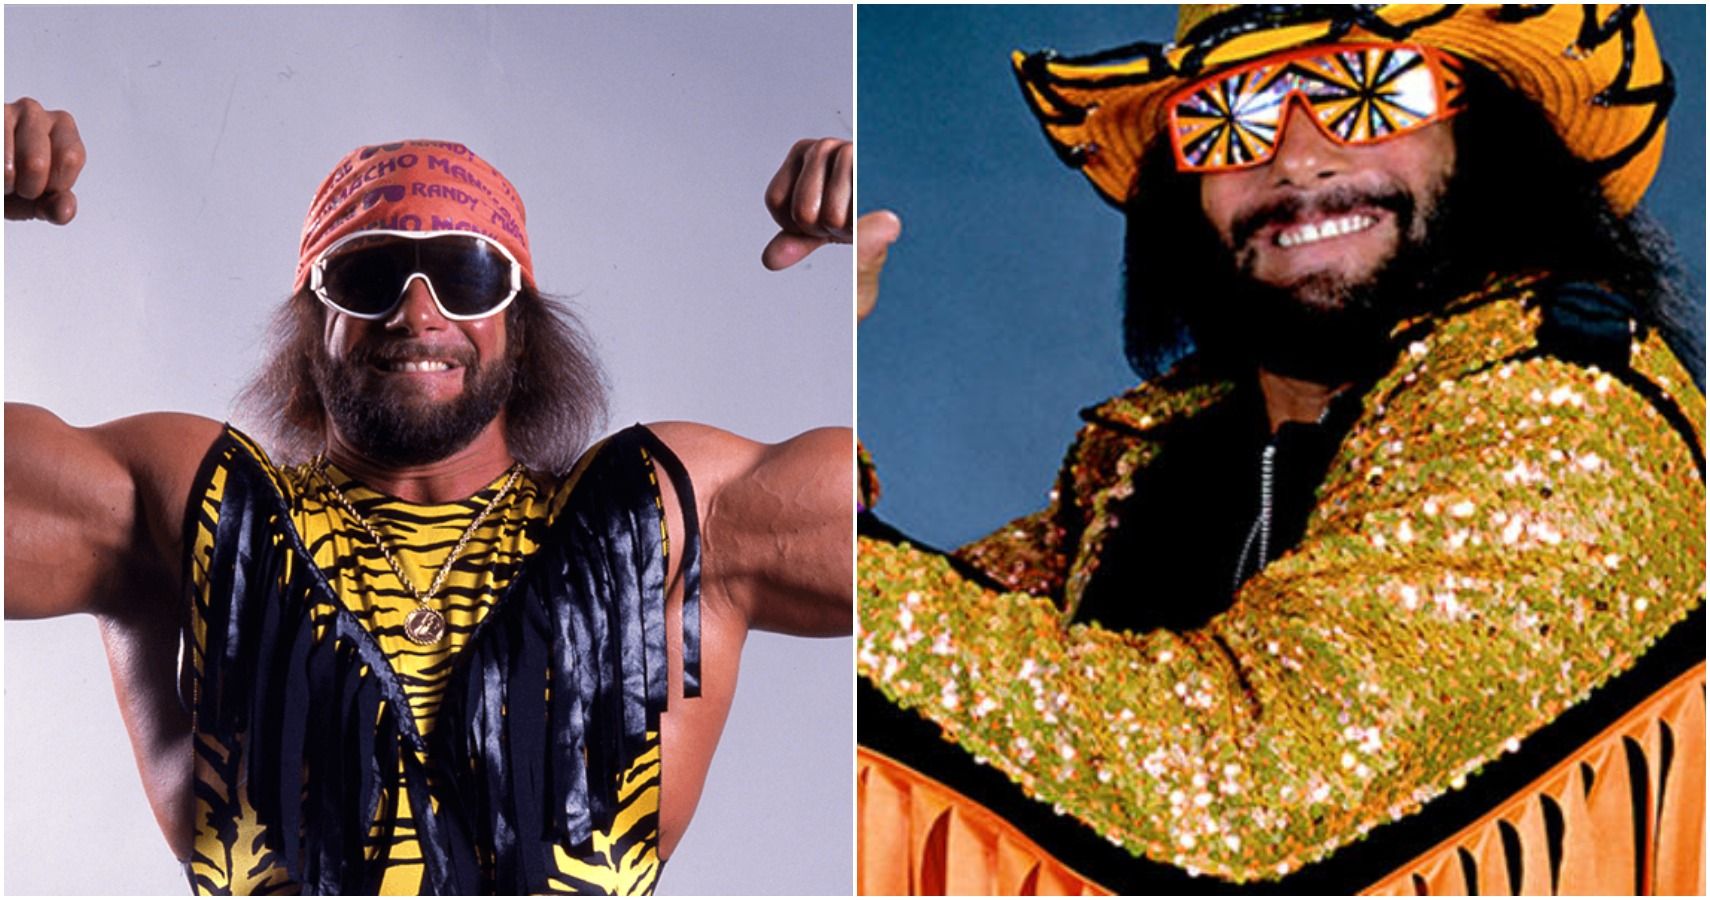 Macho Man Randy Savage A Smaller WWE Wrestler With The Biggest Personality